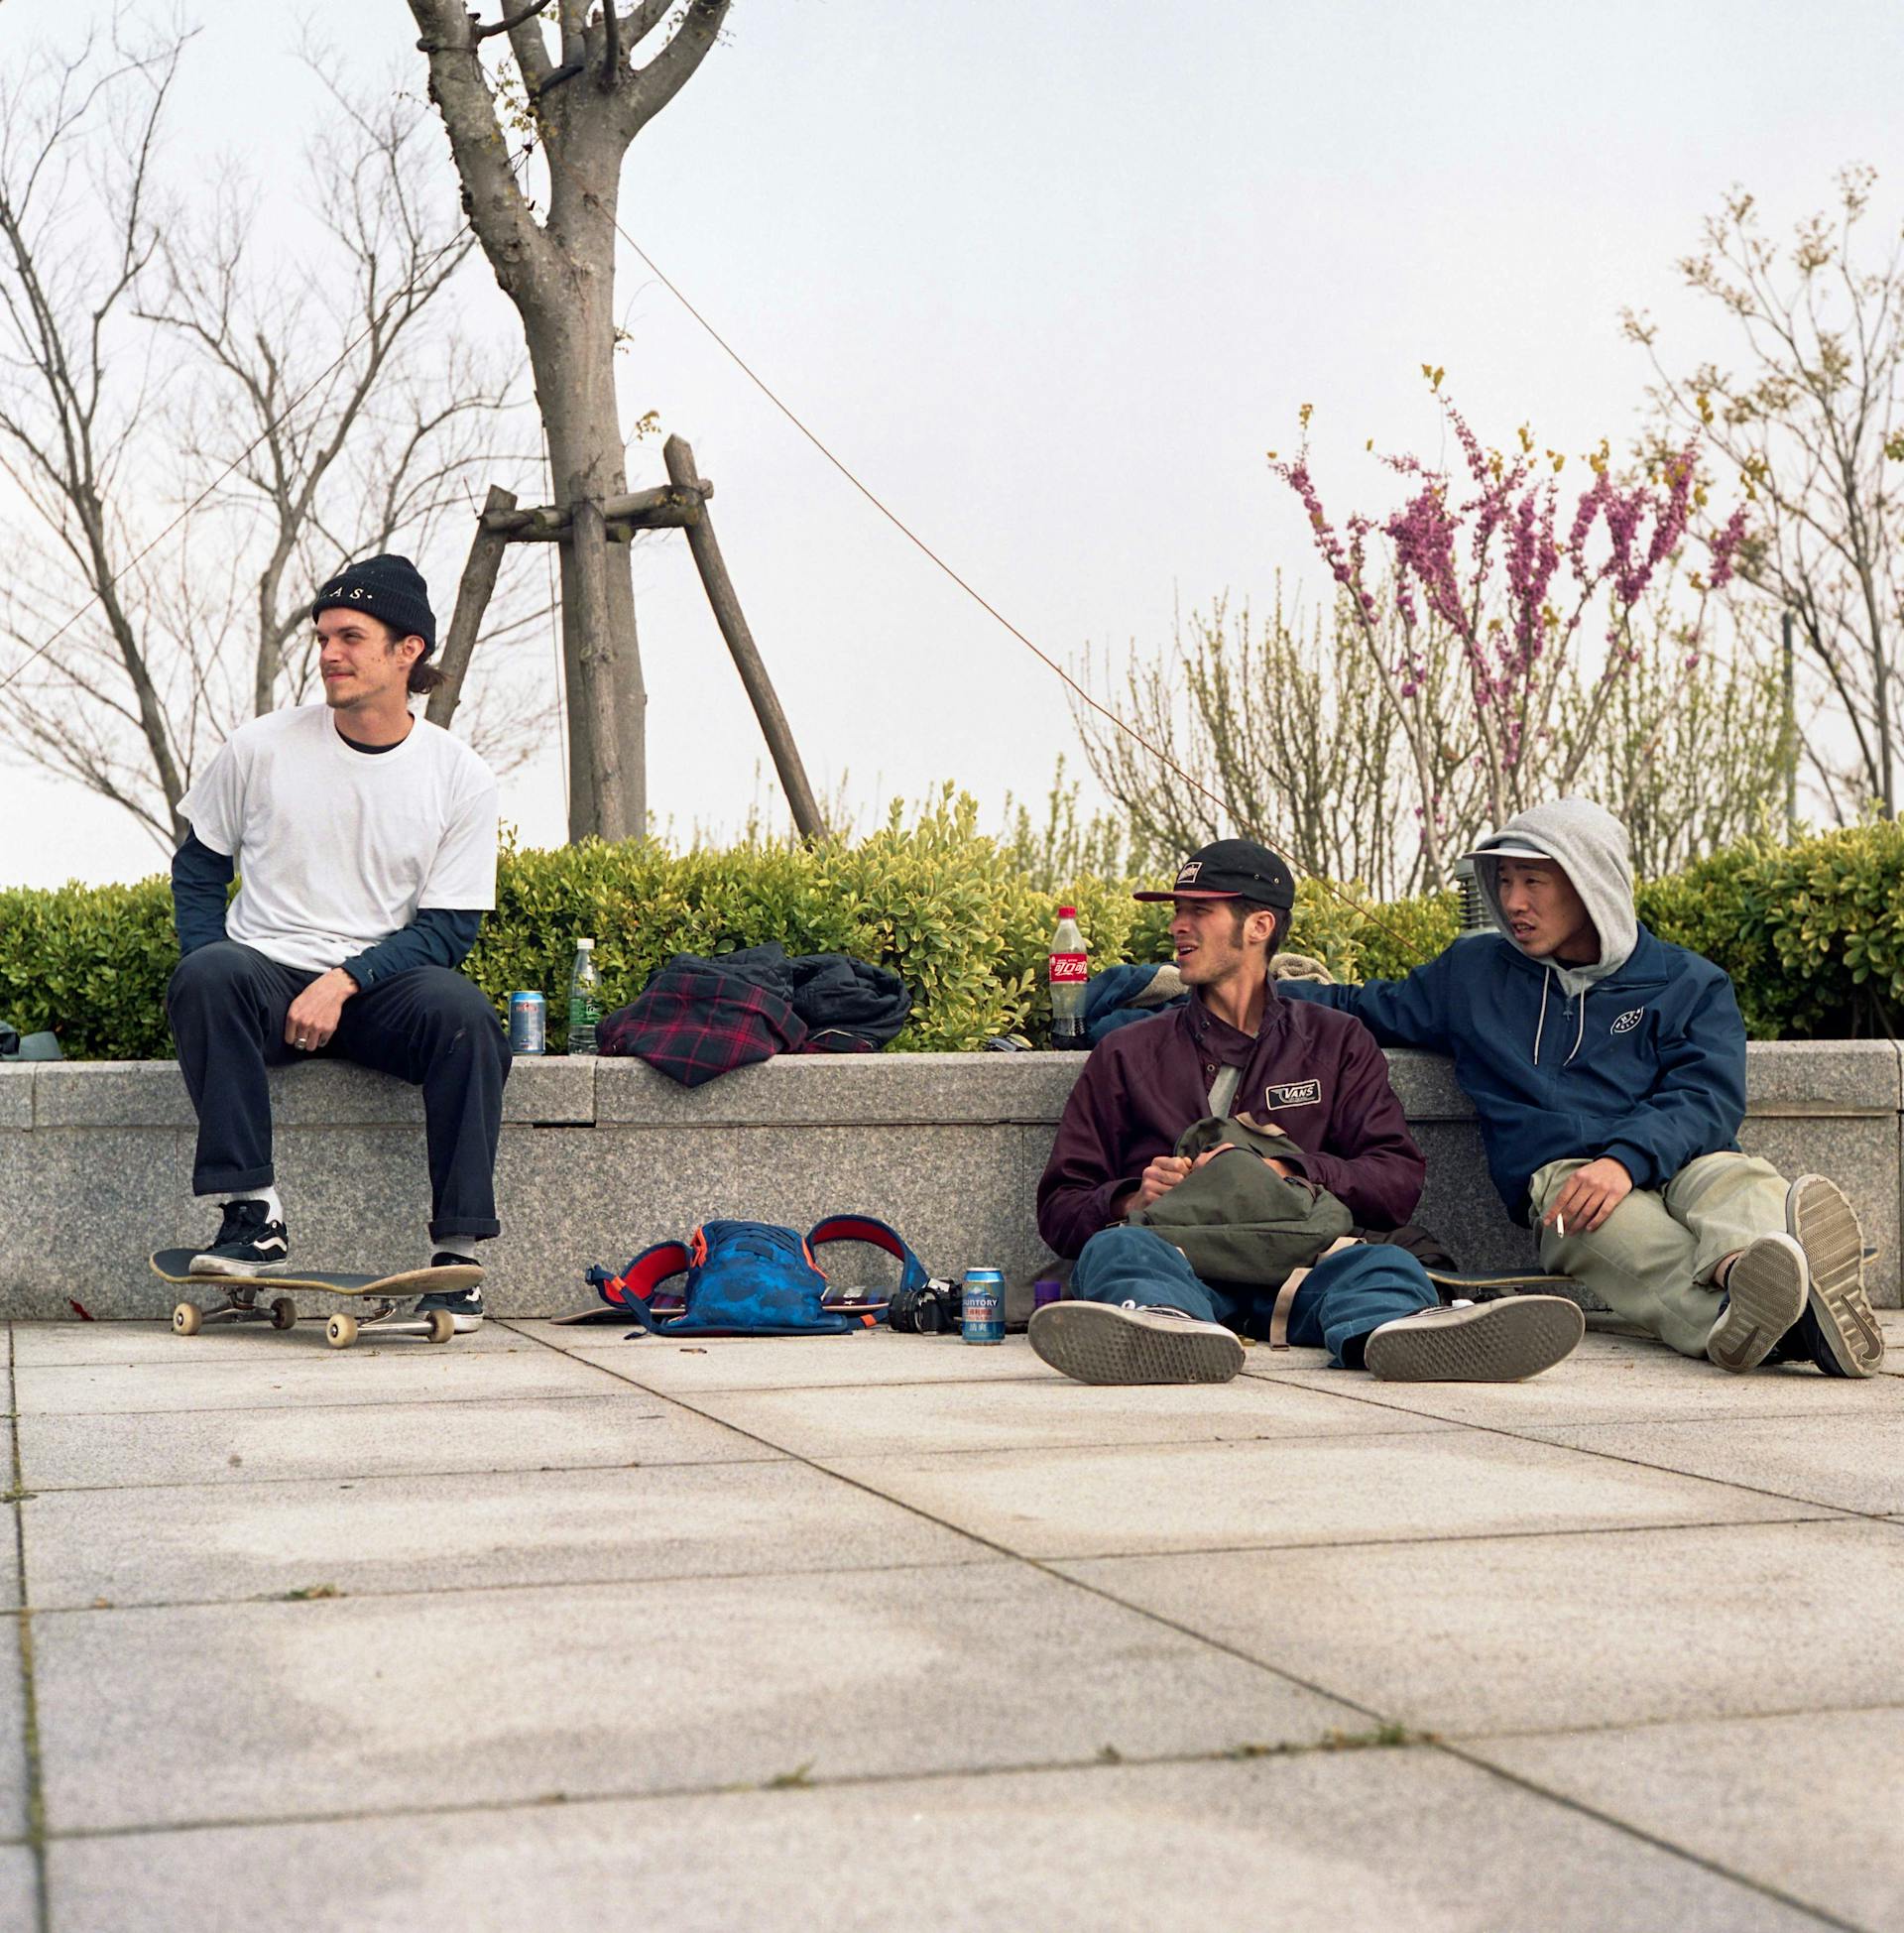 The North Face's Shanghai takeover with snow, skateboarding